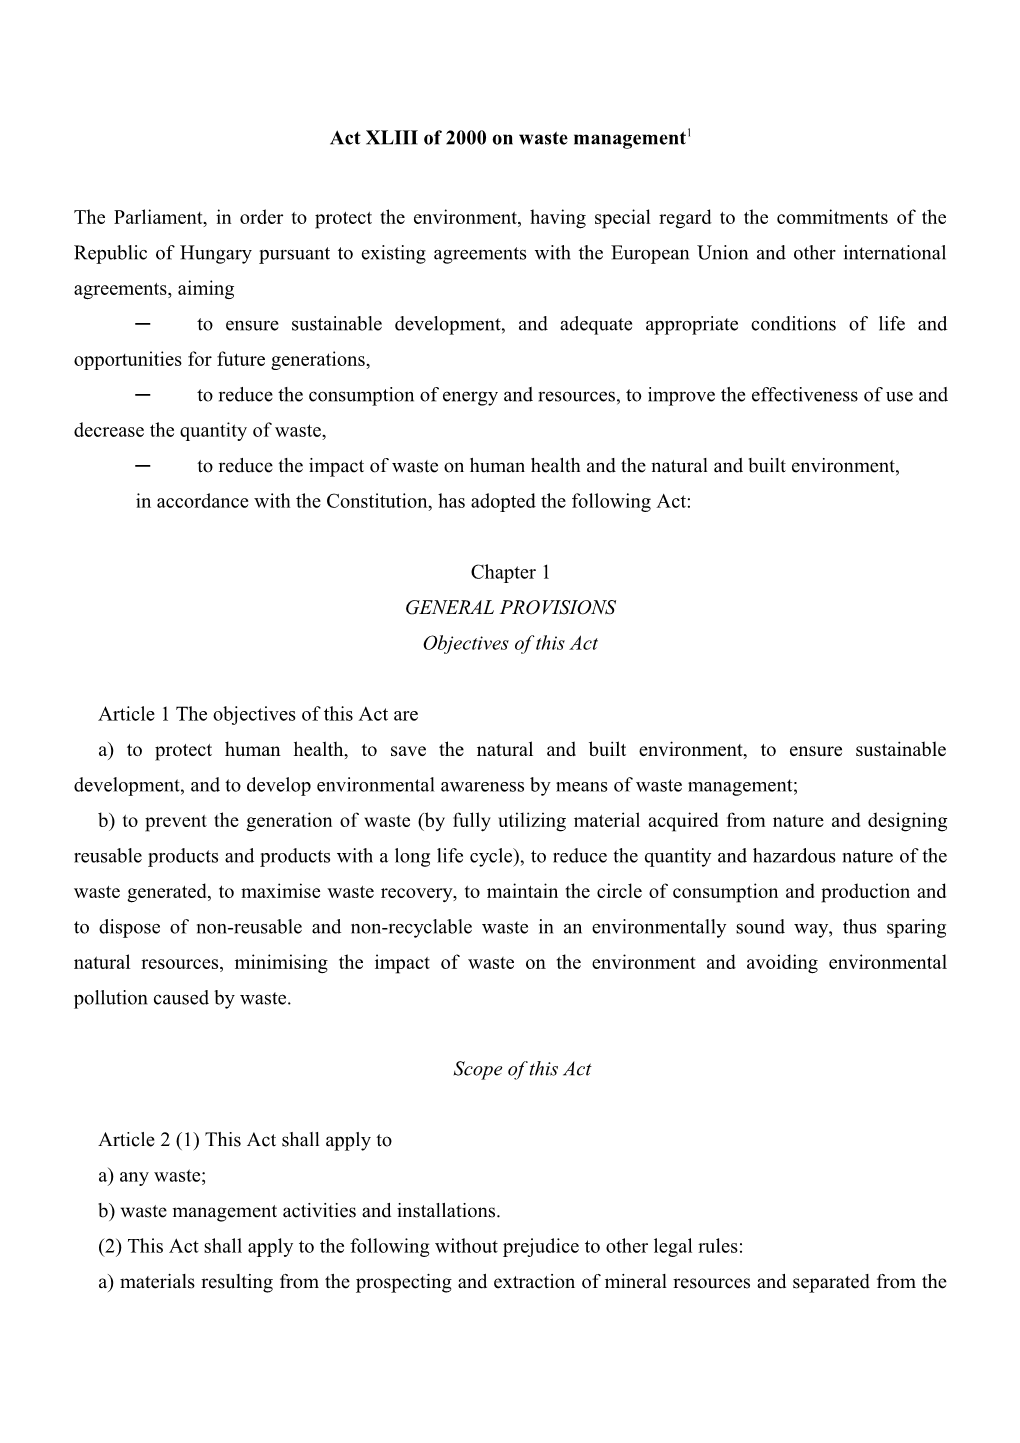 Act XLV III of 2000 on Waste Management 1